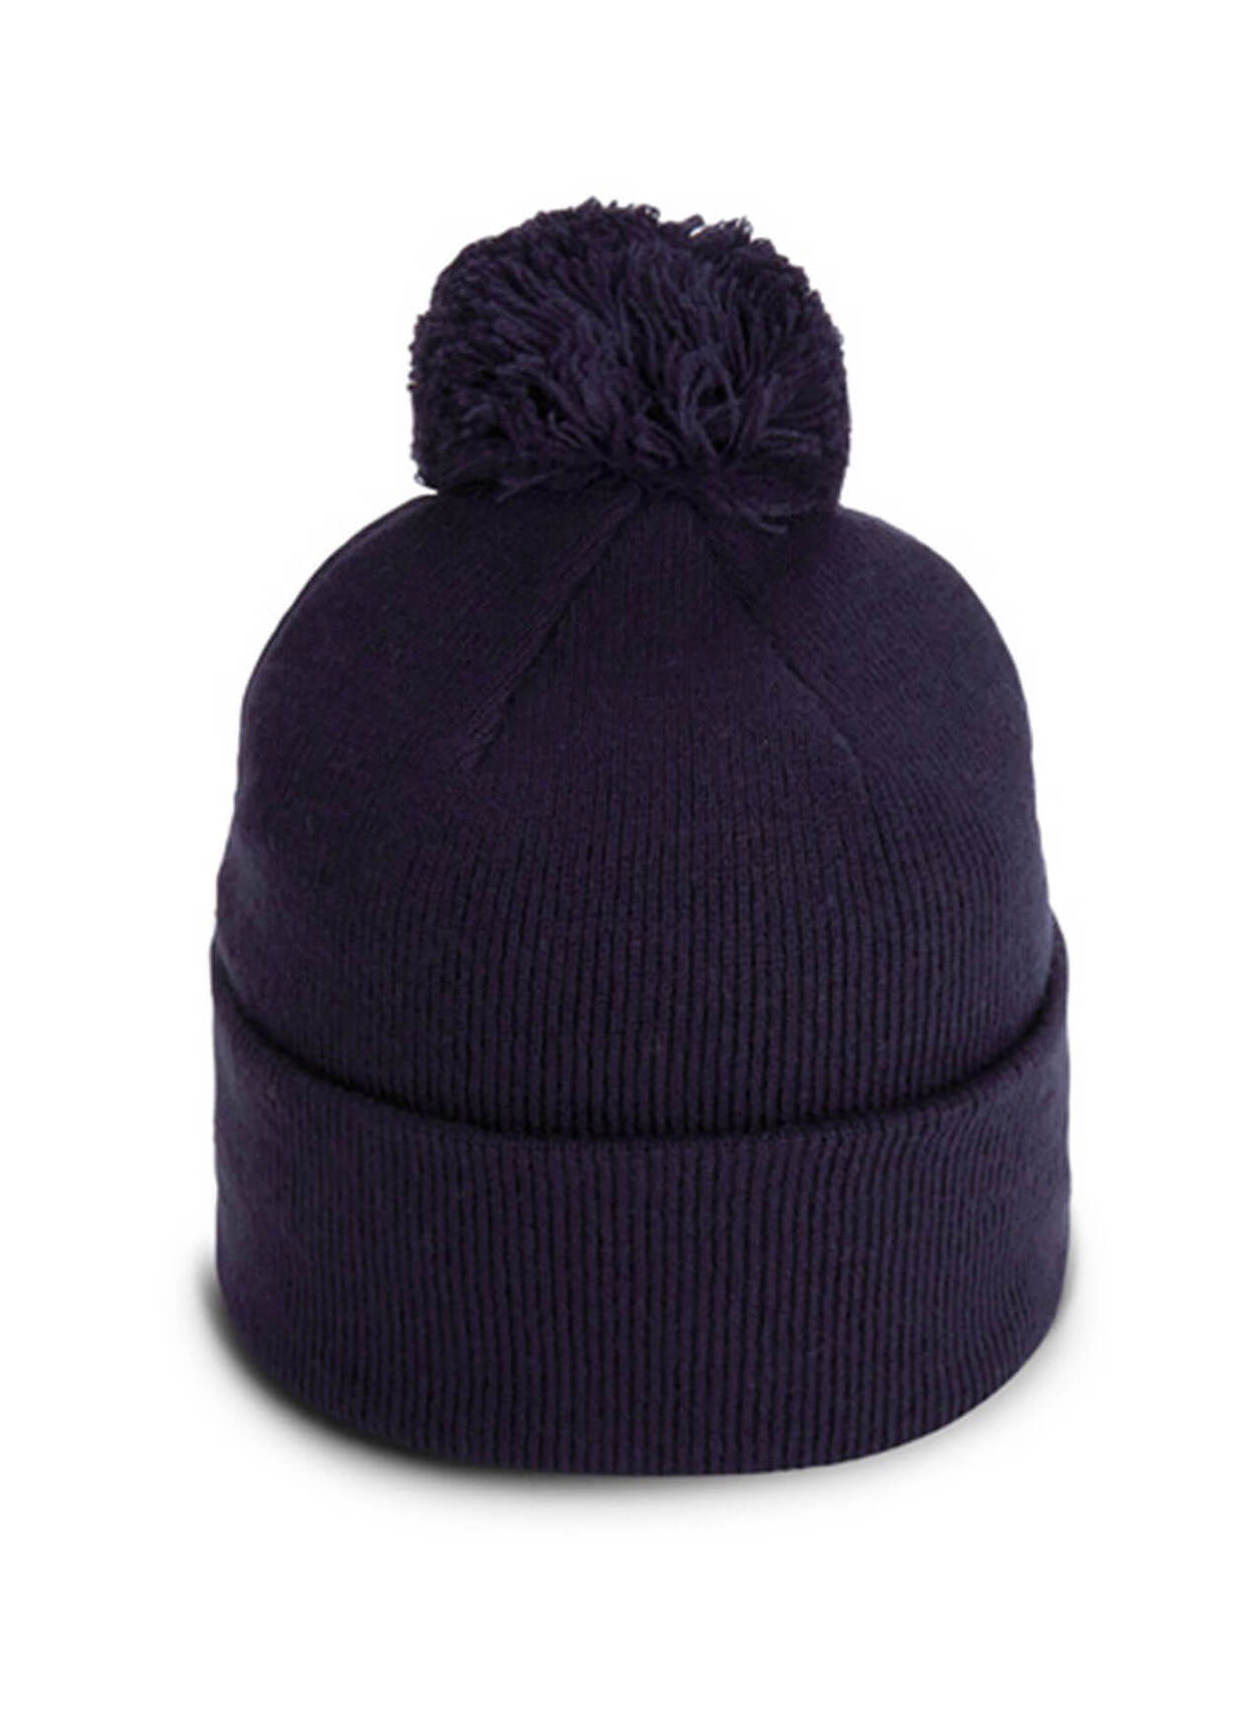 Imperial Navy The Tahoe Knit Beanie with Pom